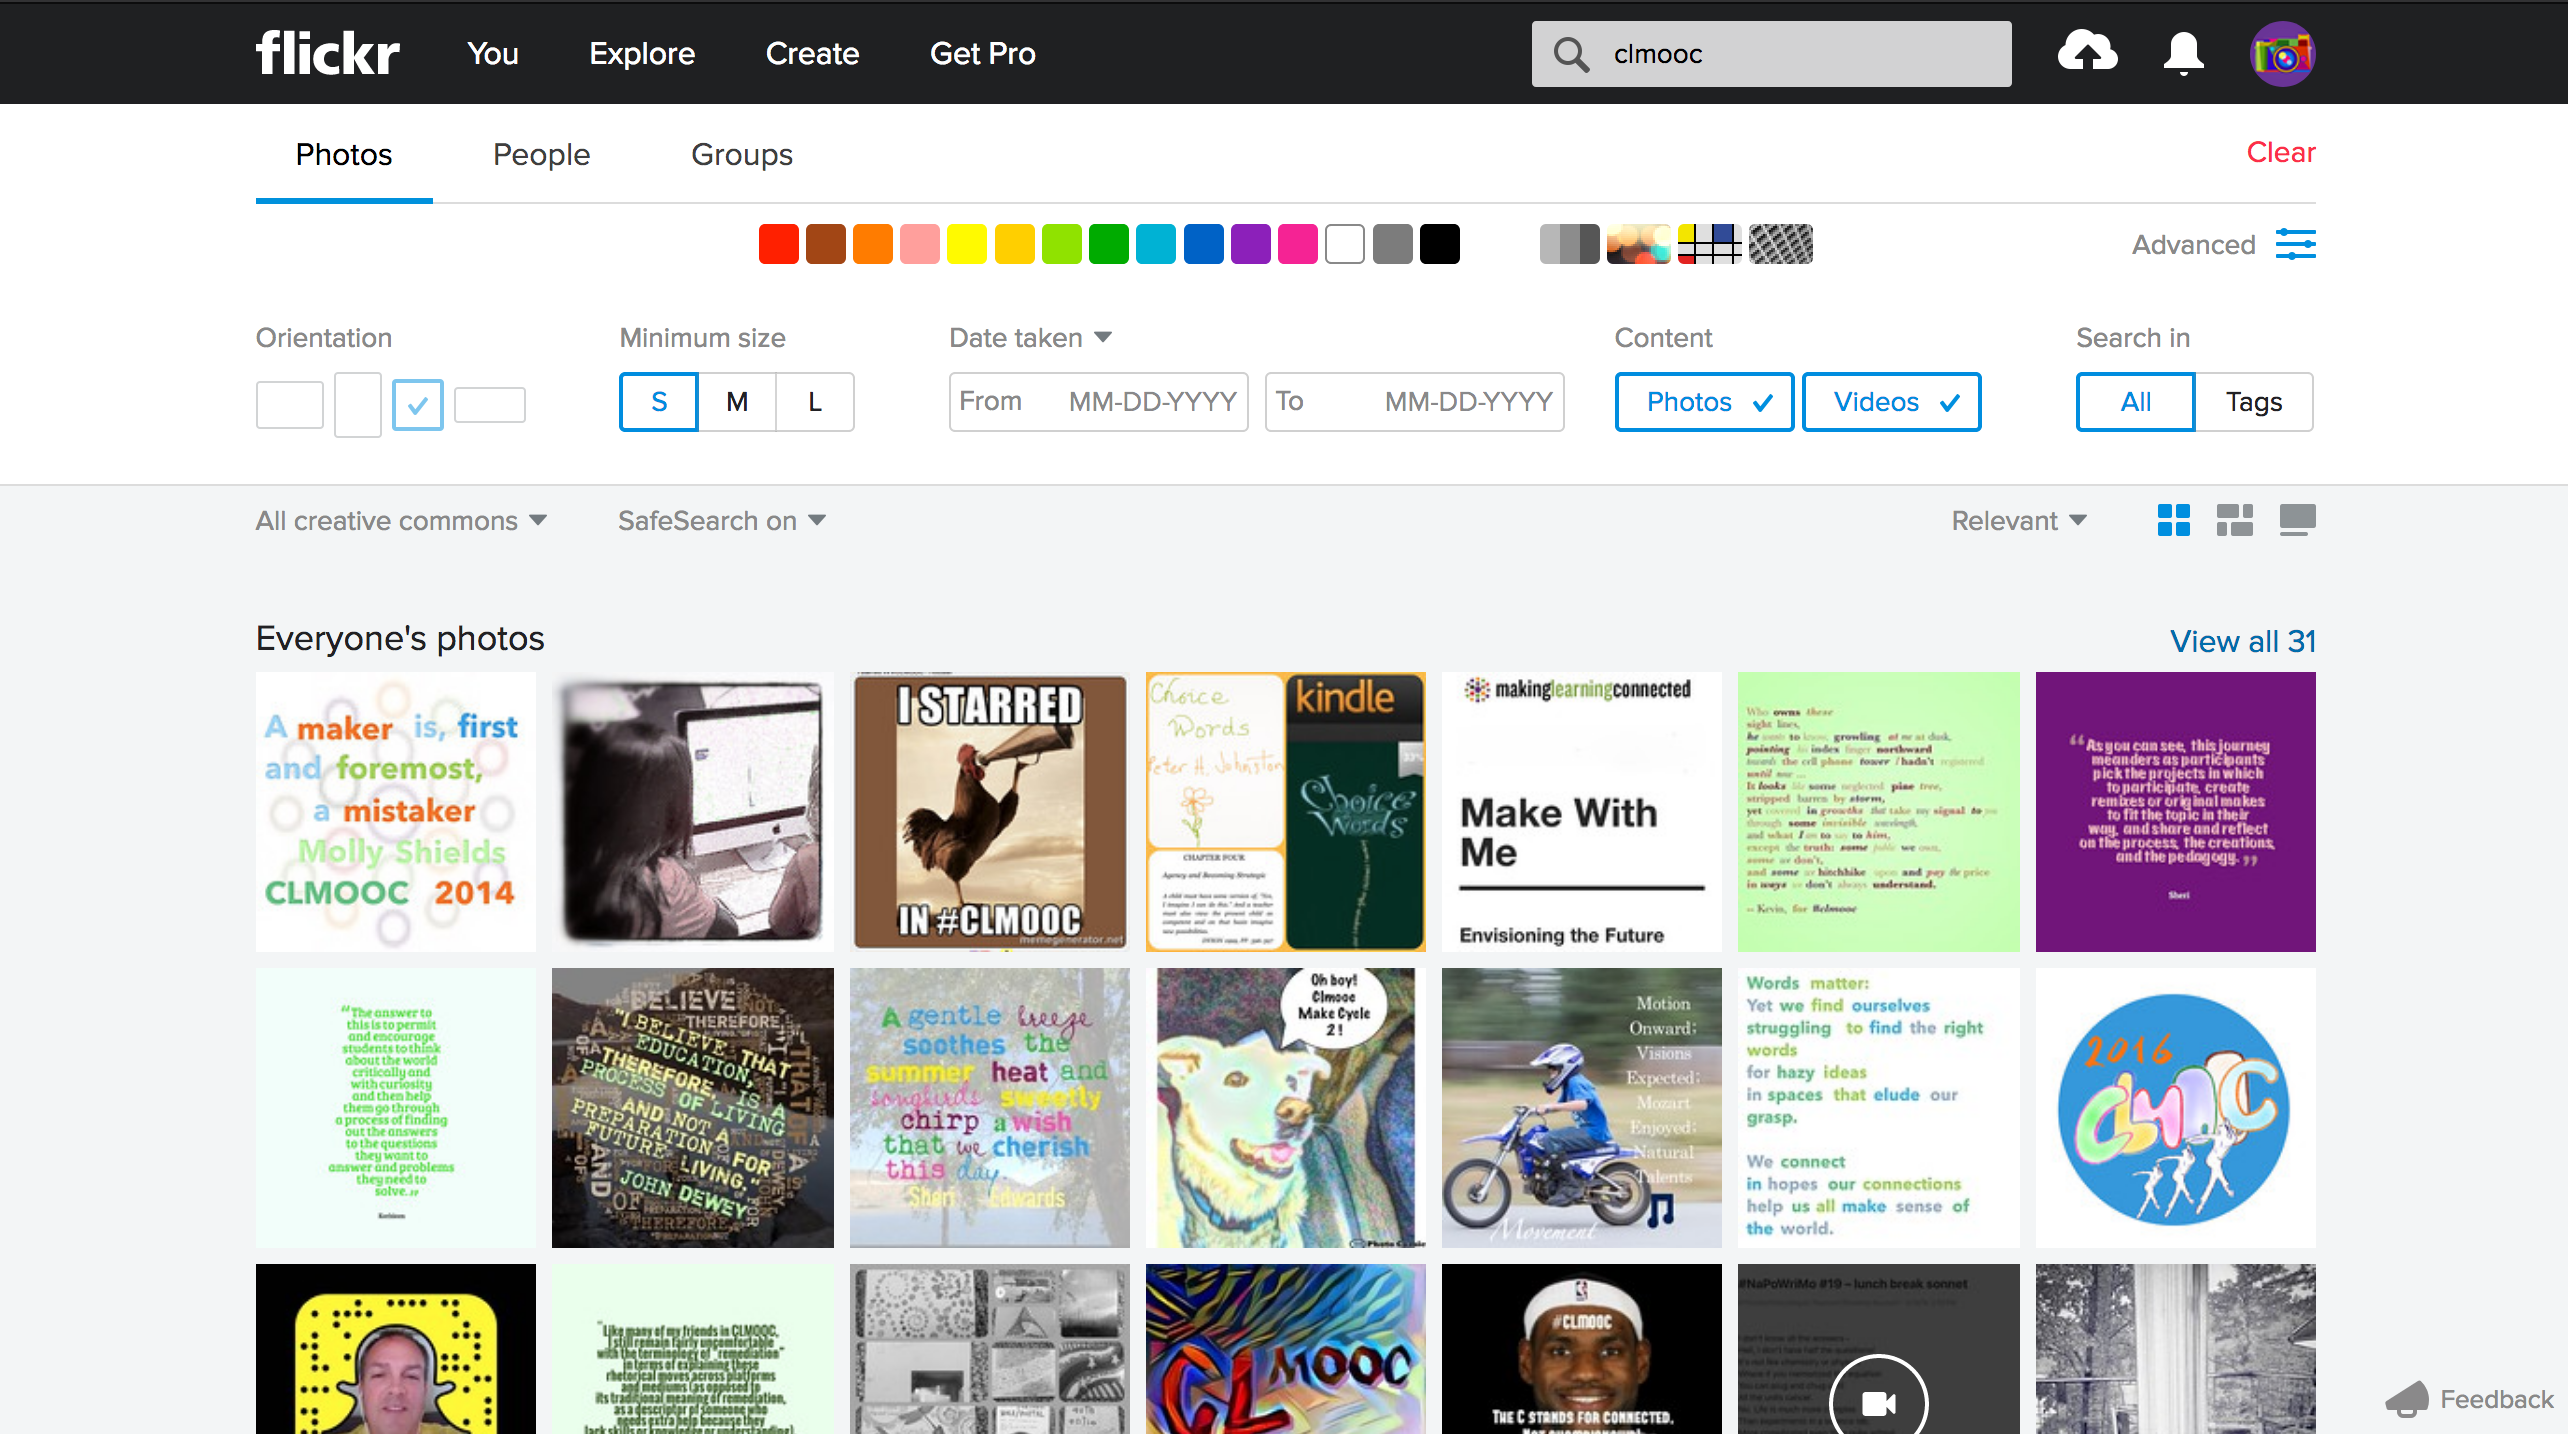 screenshot of creative commons and square image on flickr using advanced search tools